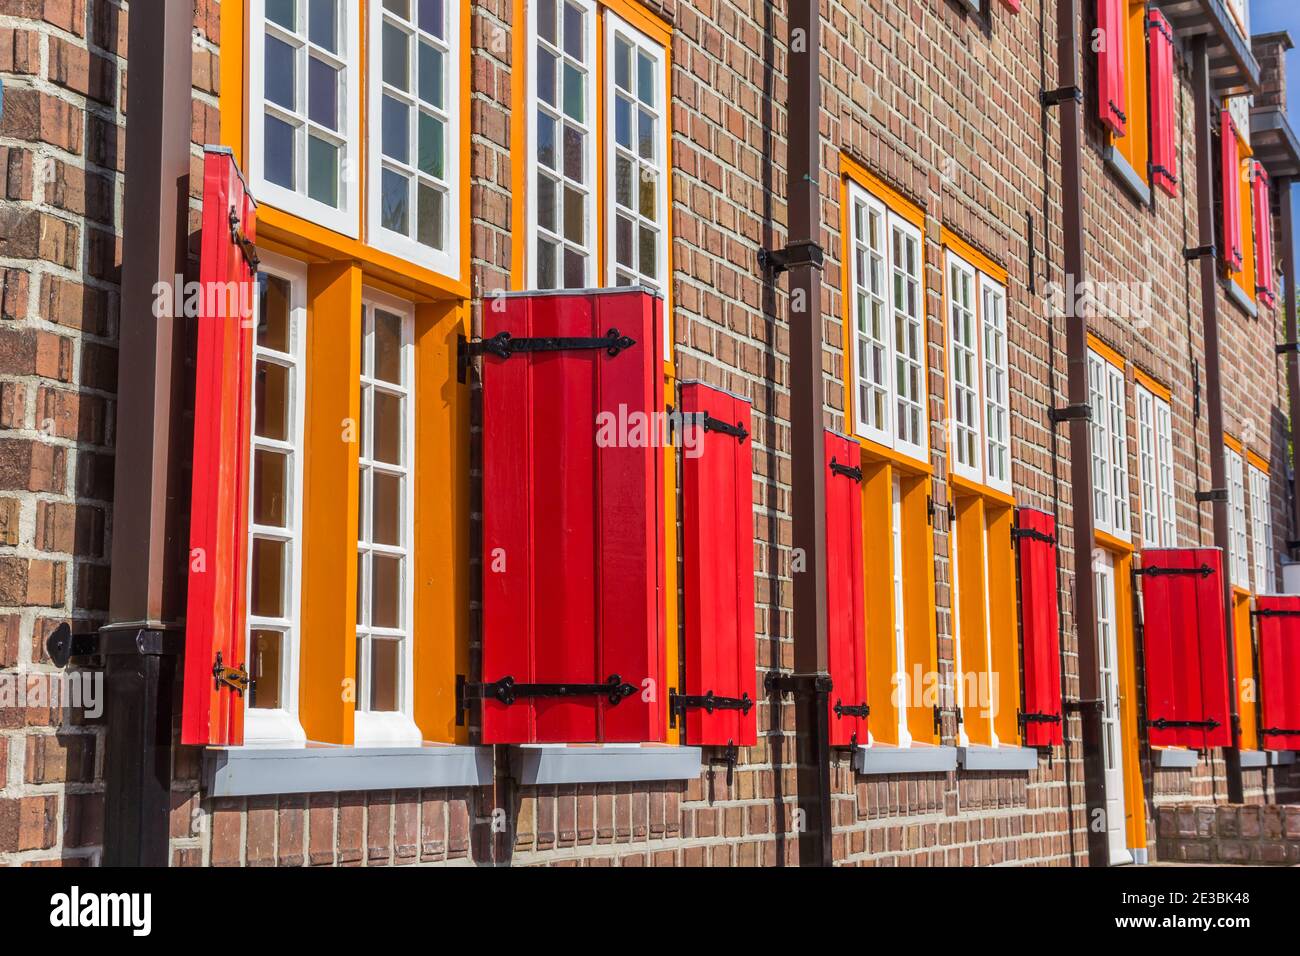 Red and orange windows on a restaurant in Tubbergen, Netherlands Stock Photo